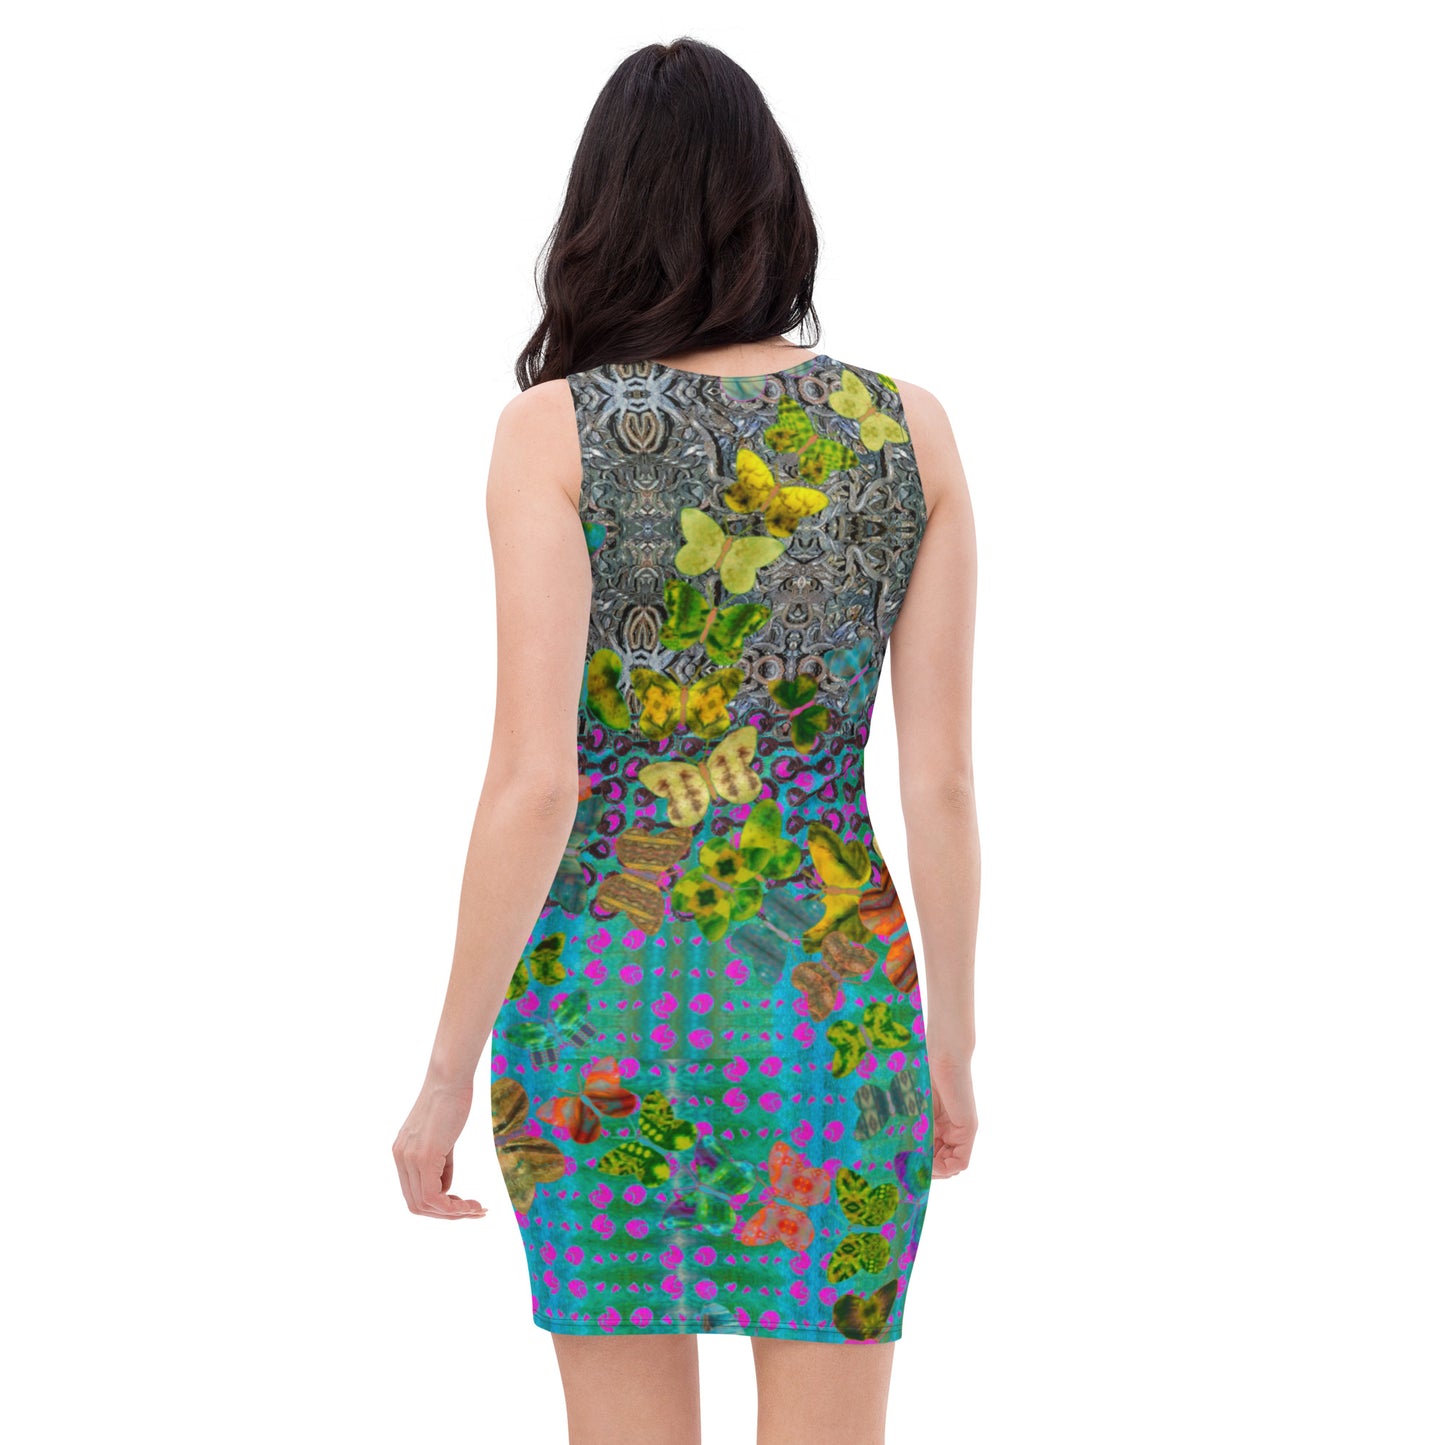 Fitted Sleeveless Dress (Her/They)(Butterfly Glade Shoal Solstice GNHV8.8) RJSTH@Fabric#8 RJSTHw2021 RJS